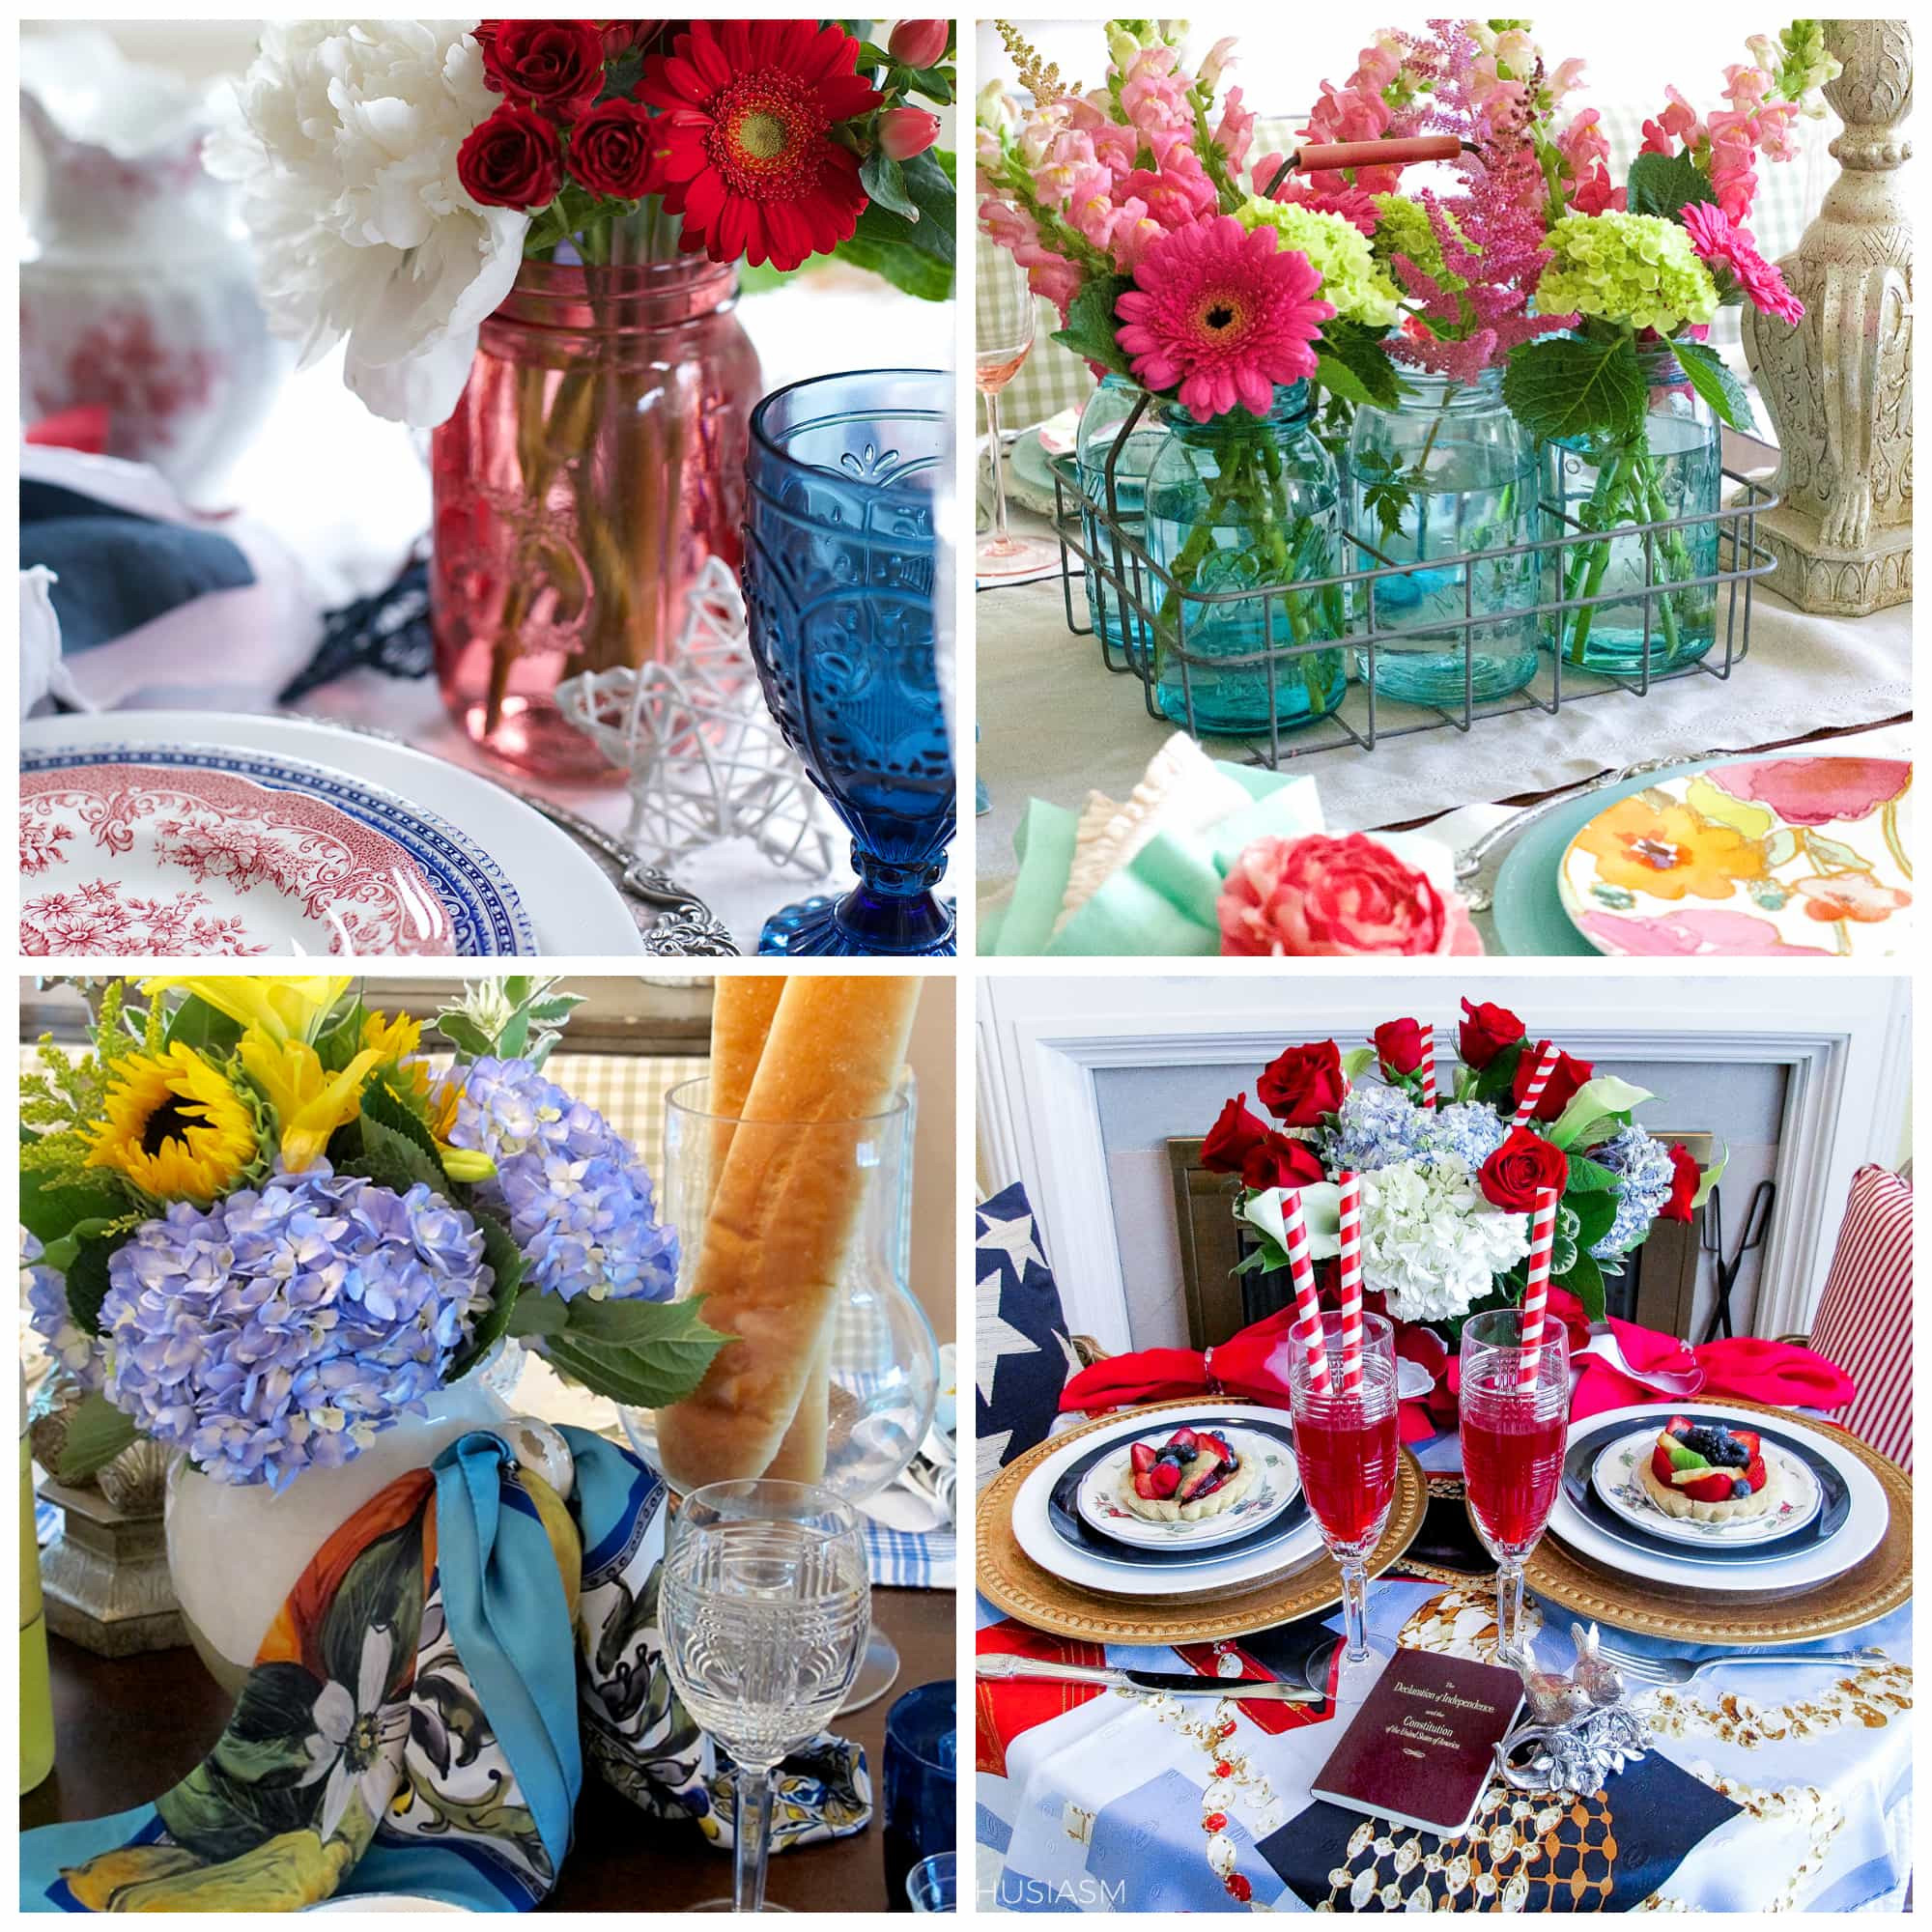 Decorating Ideas For A Summer Party
 Summer Party Decorations 6 Colorful Tablescape Ideas